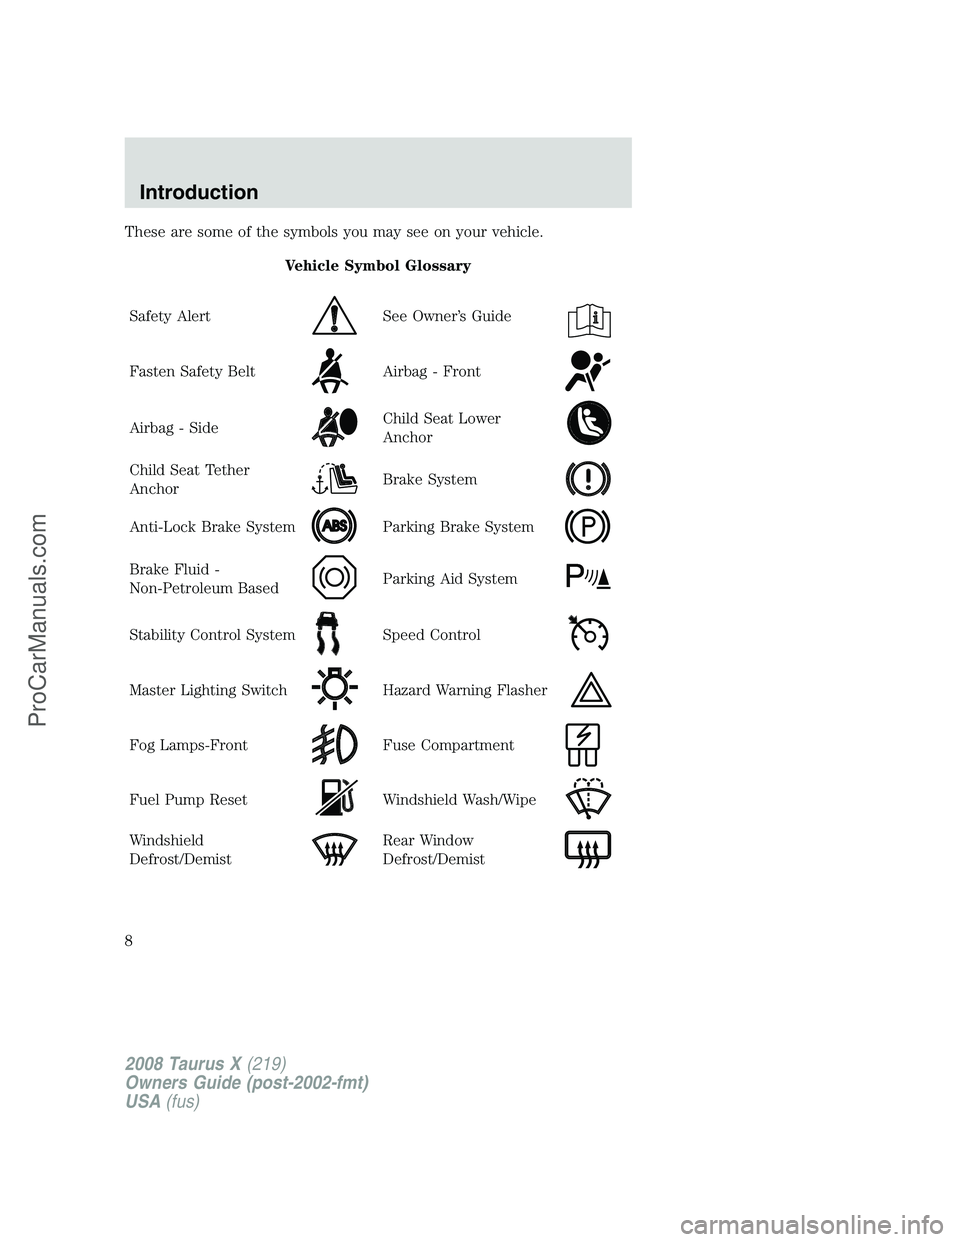 FORD FREESTYLE 2008  Owners Manual These are some of the symbols you may see on your vehicle.
Vehicle Symbol Glossary
Safety Alert
See Owner’s Guide
Fasten Safety BeltAirbag - Front
Airbag - SideChild Seat Lower
Anchor
Child Seat Tet